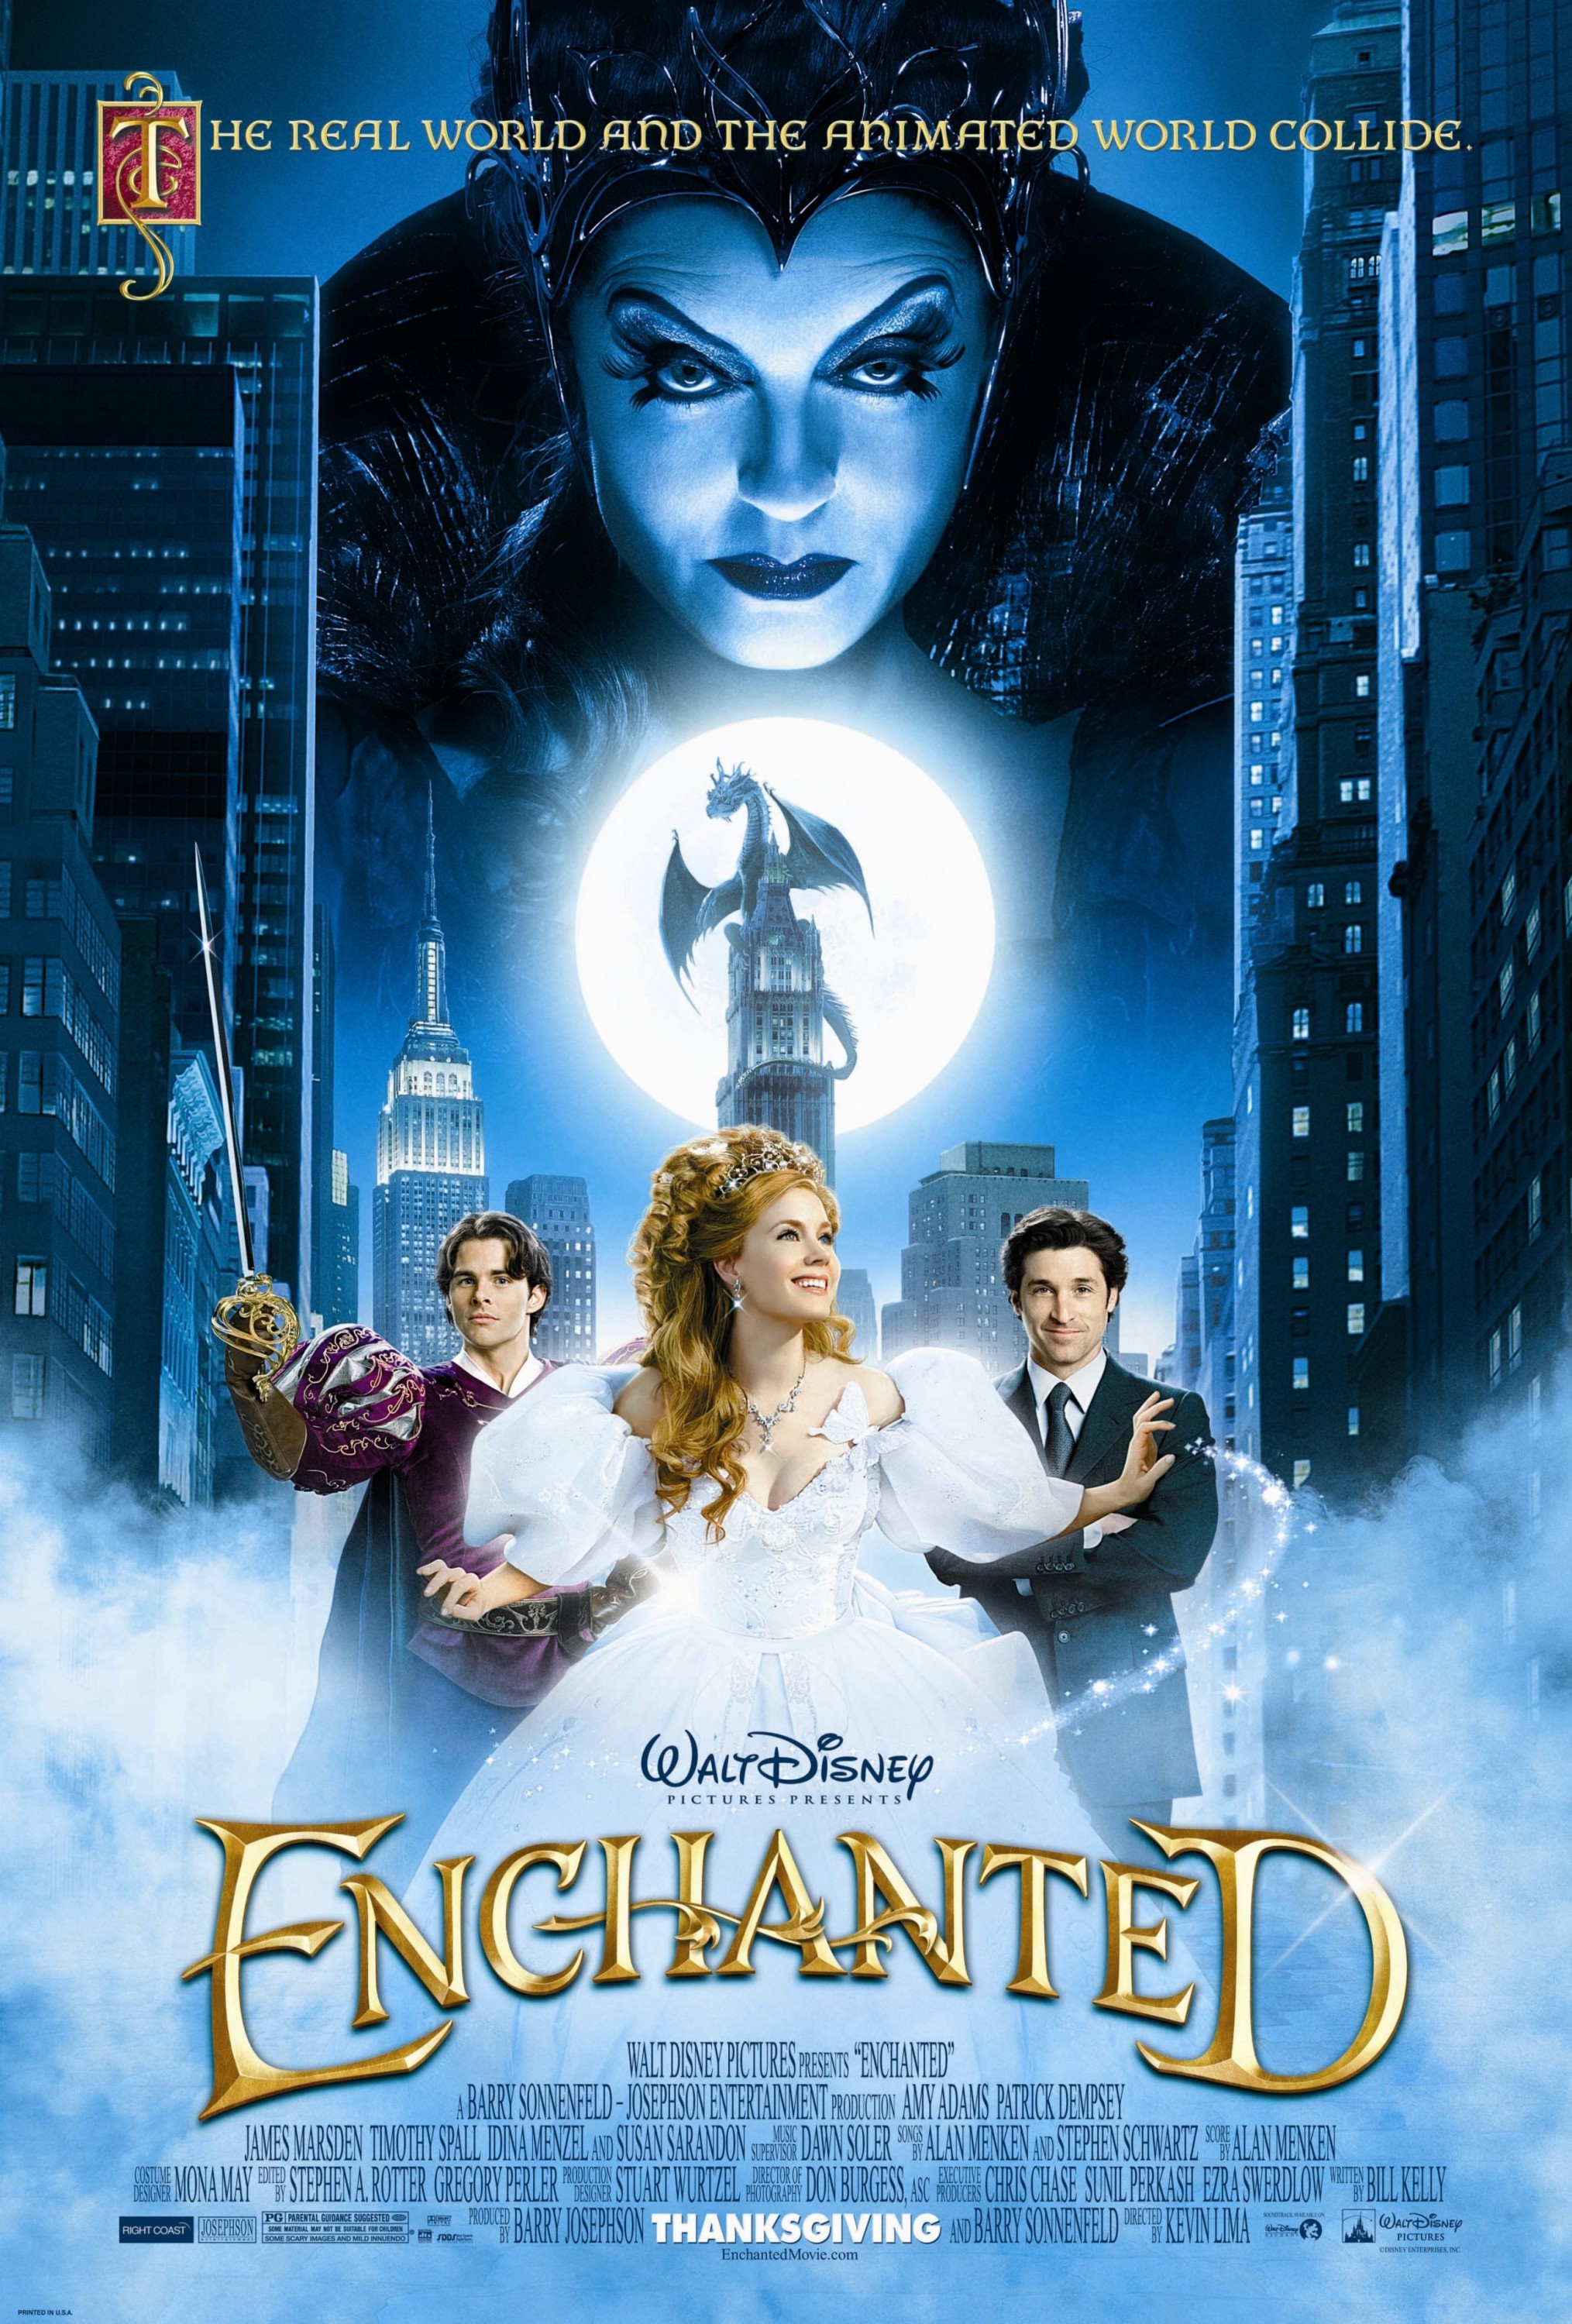 https://static.wikia.nocookie.net/disney/images/3/38/Enchanted-poster.jpg/revision/latest?cb=20150929151034